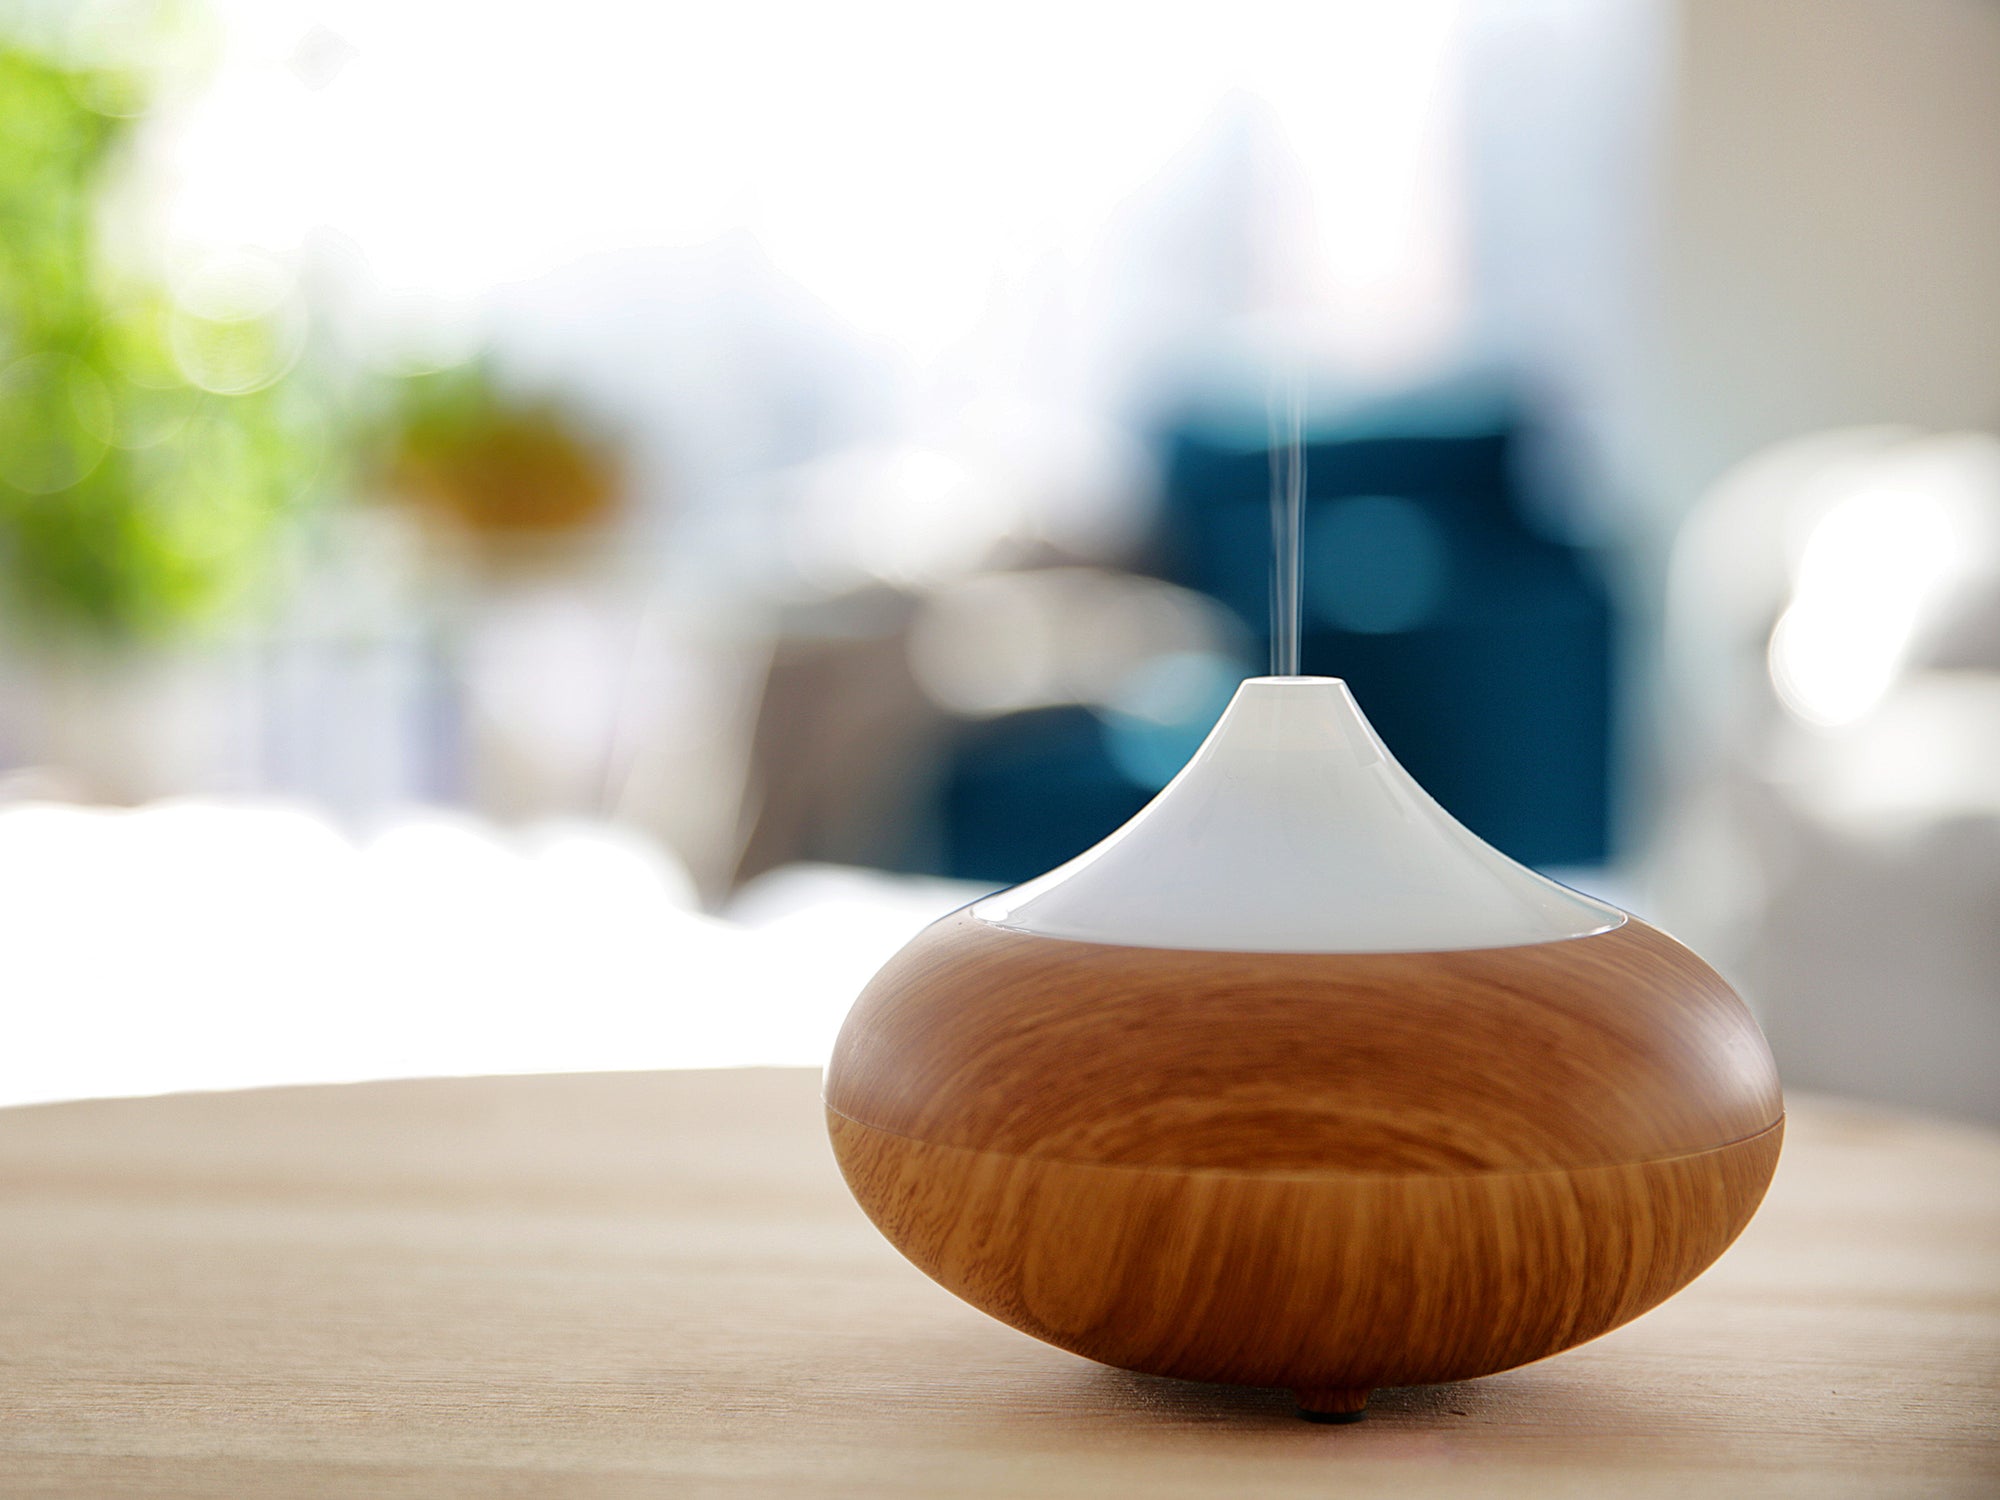 A diffuser sits on top of a table, releasing diffused scents into the room.